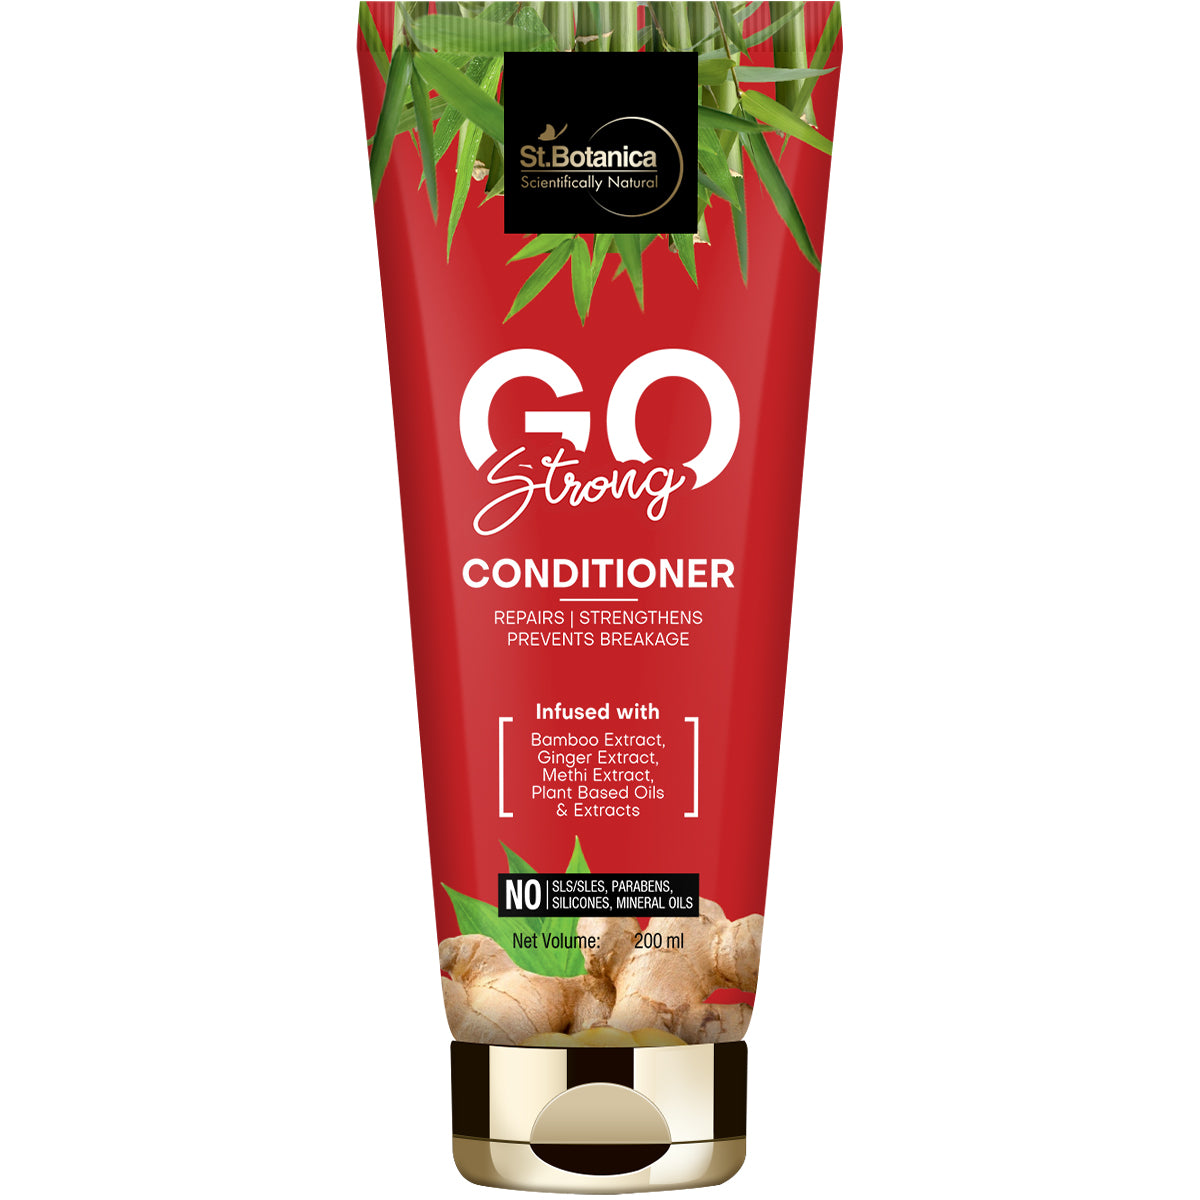 St.Botanica Go Strong Hair Conditioner - With Bamboo Extract, Ginger Extract, Methi Extract, No Sls/ Sulphate, Paraben, Silicones, Colors, 200 ml